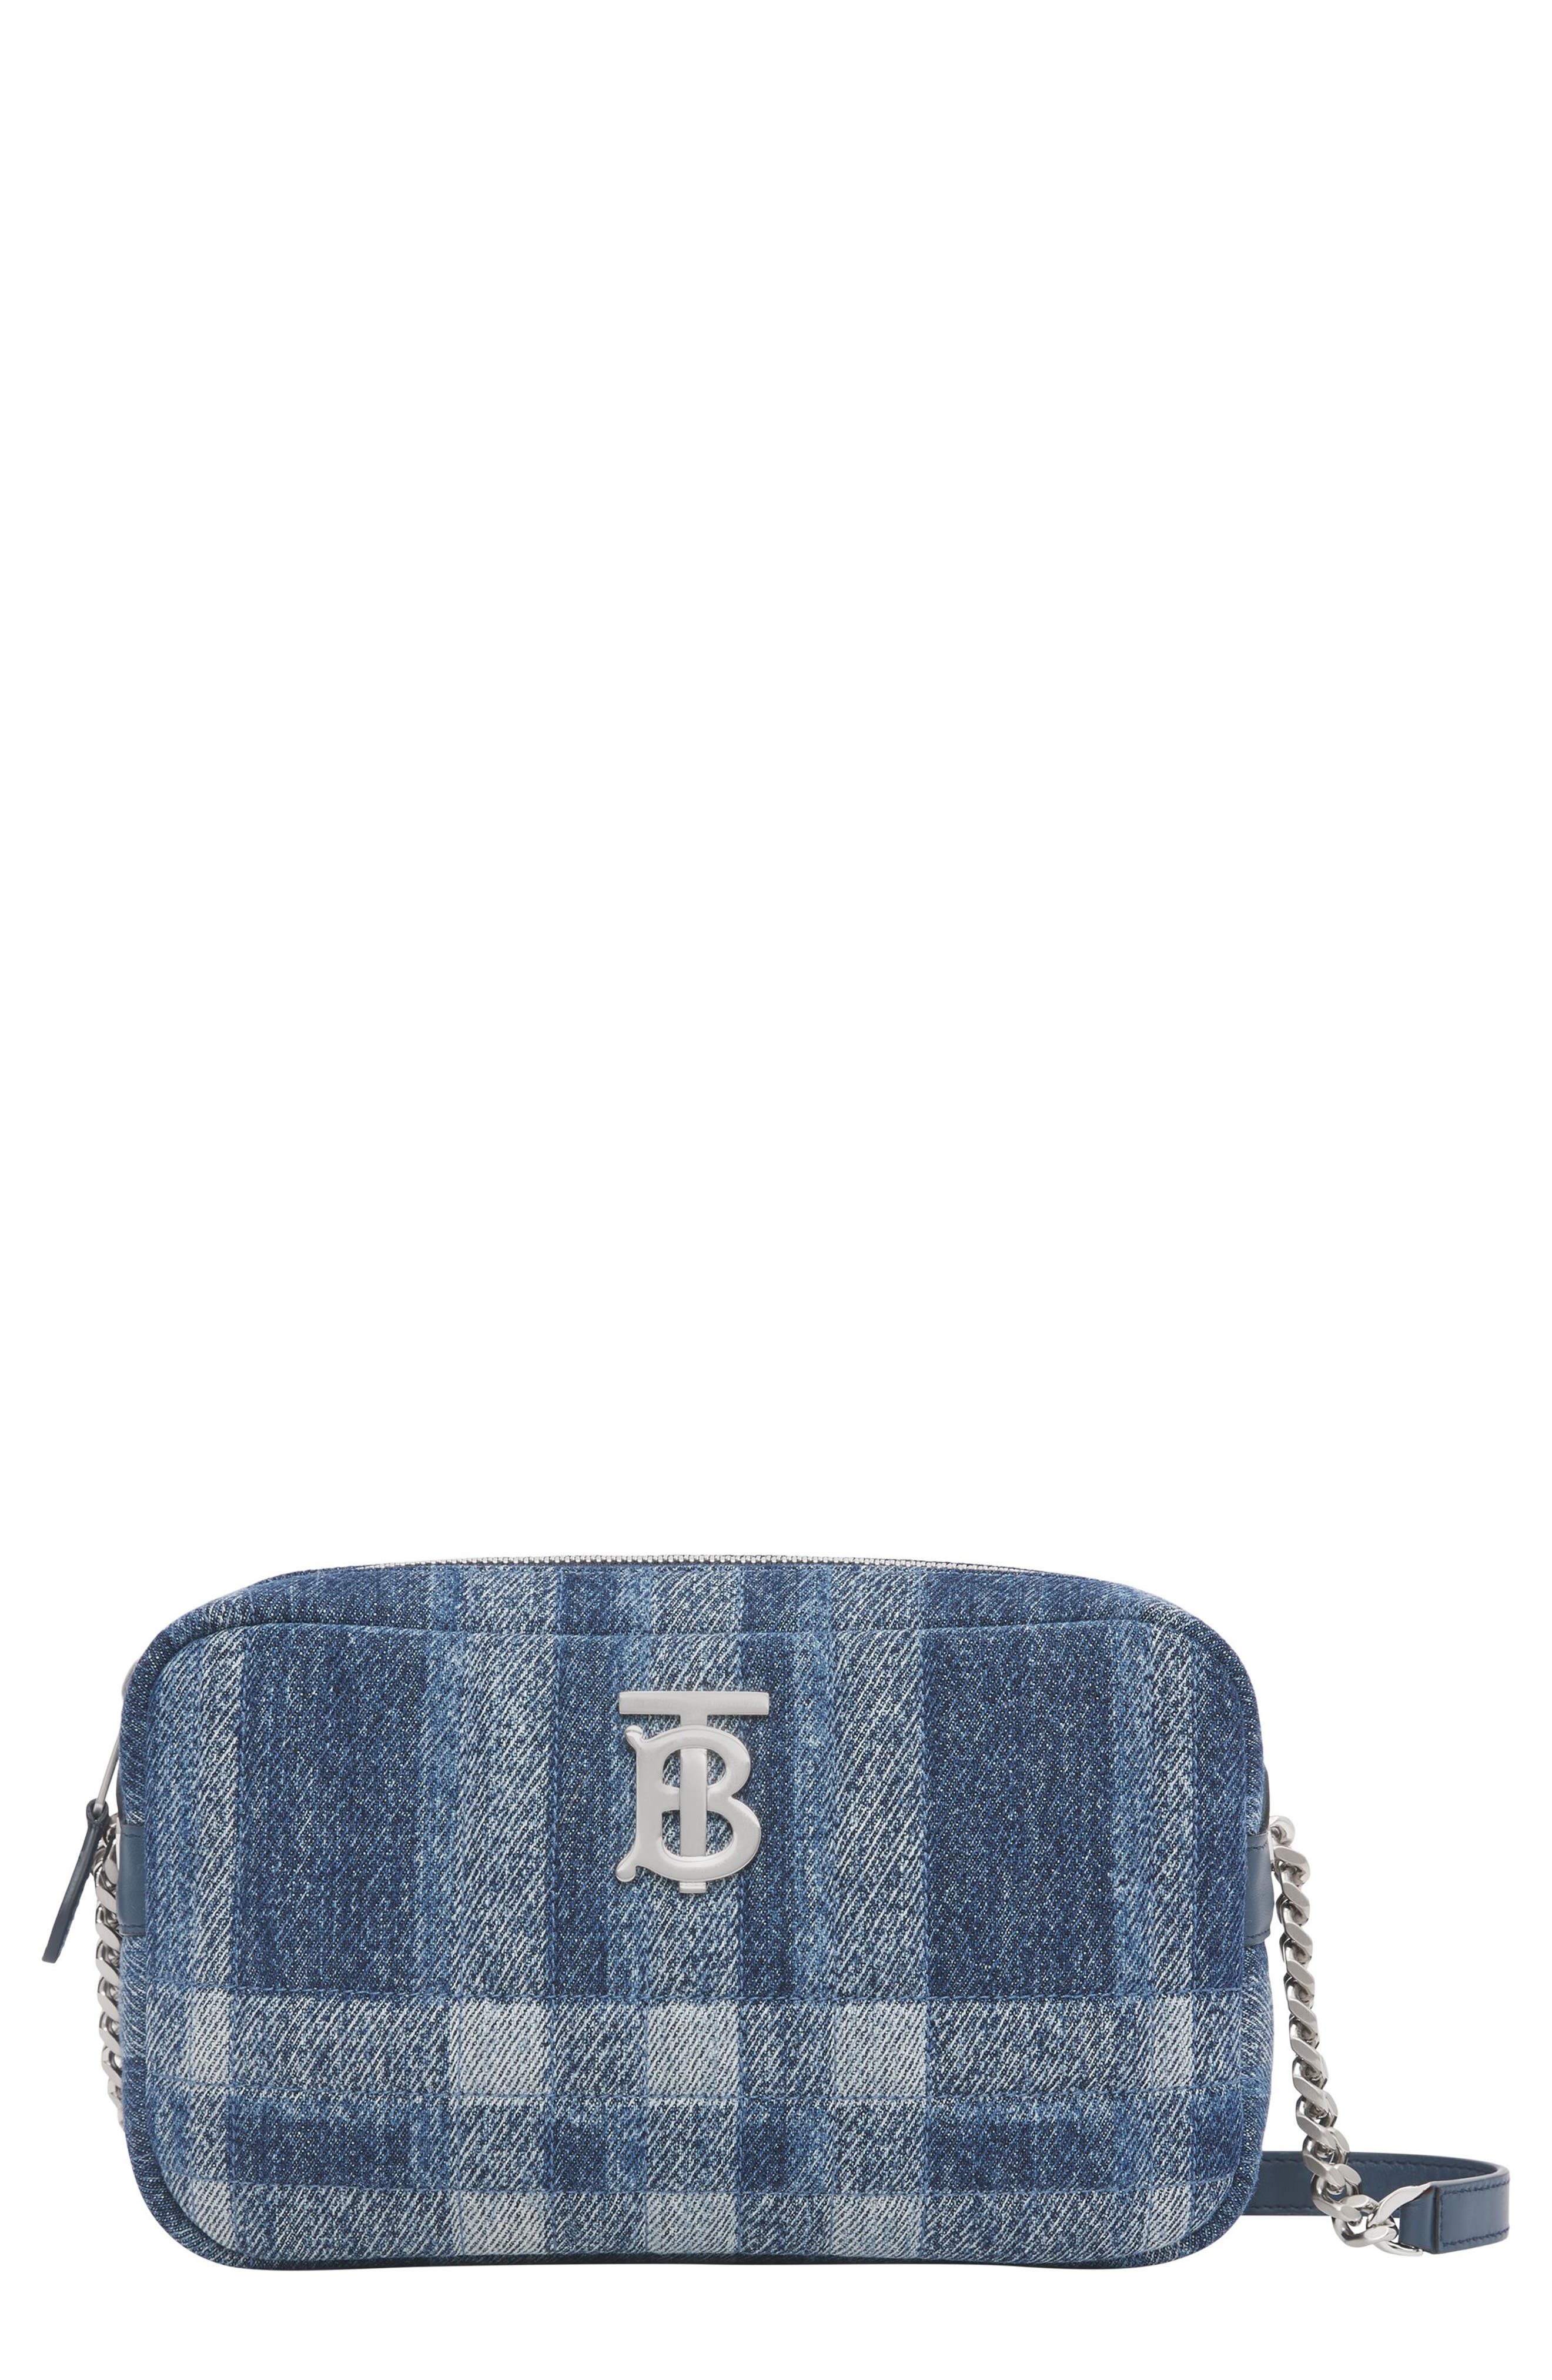 Burberry Small Lola Denim Check Camera Bag in Blue at Nordstrom